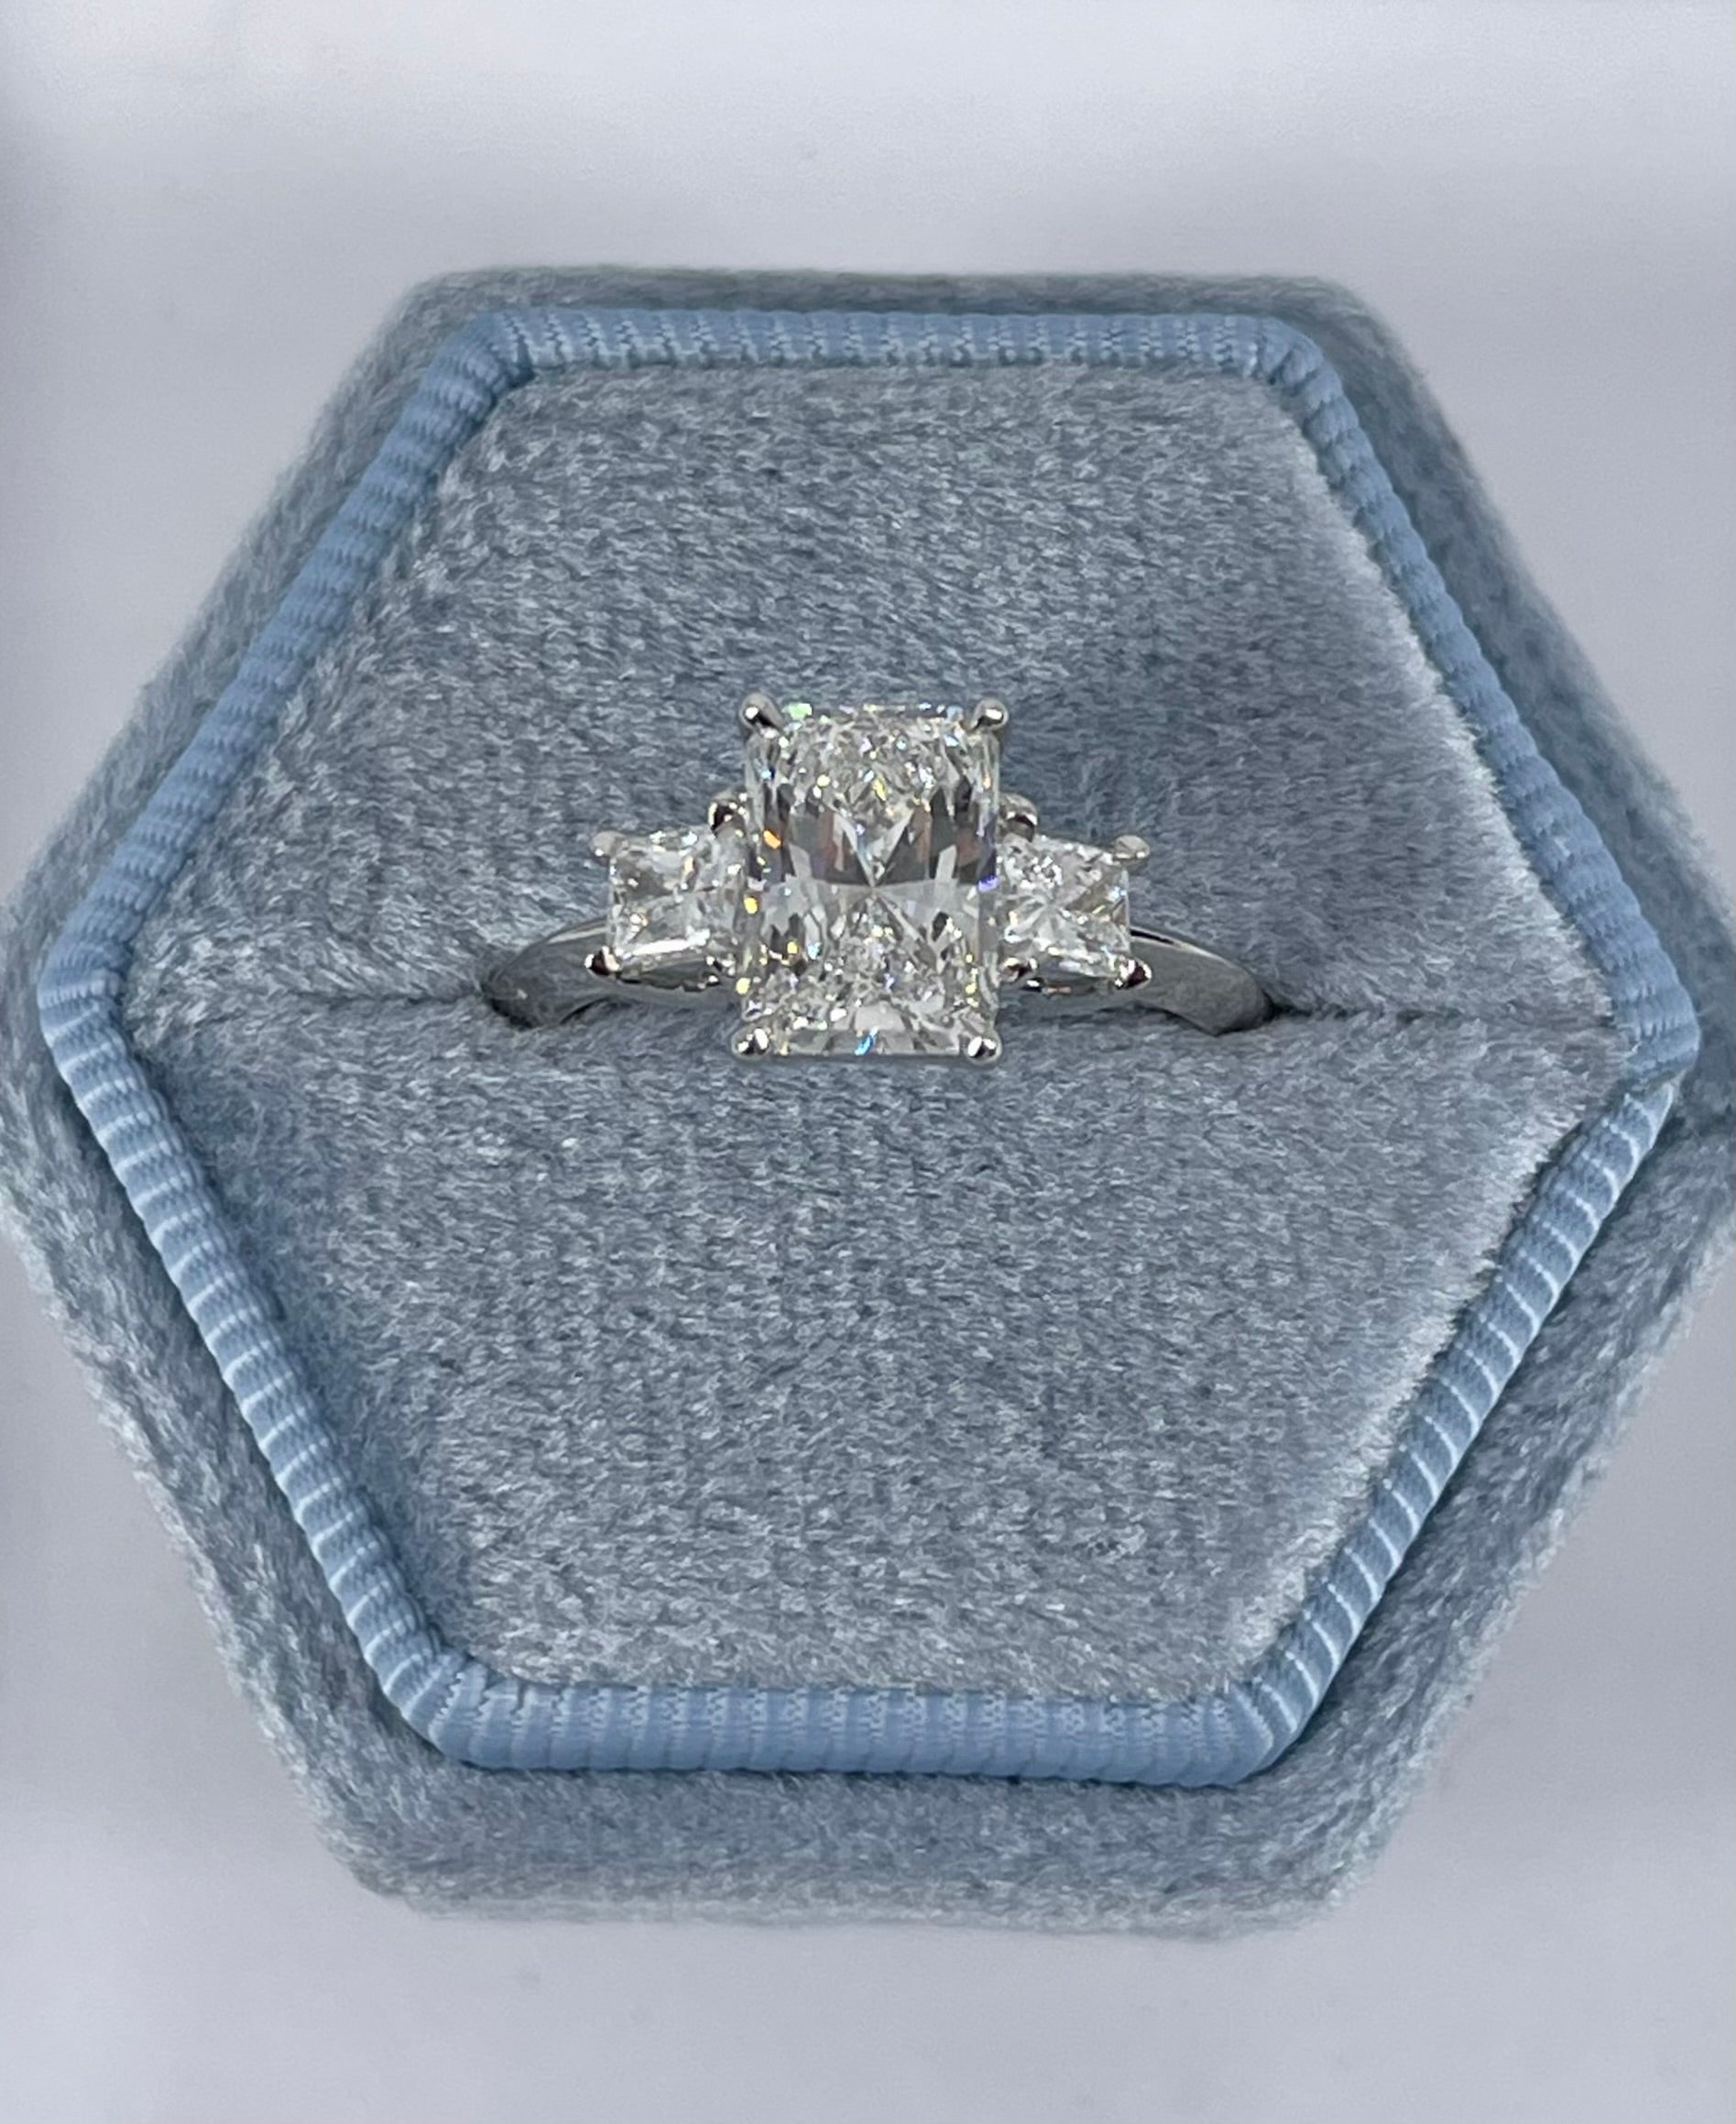 This gorgeous three stone engagement ring by J. Birnbach features a beautifully matched trio of radiant cut diamonds. The center diamond is 1.70 carats, GIA certified F color and VVS1 clarity. A colorless diamond with an exceptionally high clarity